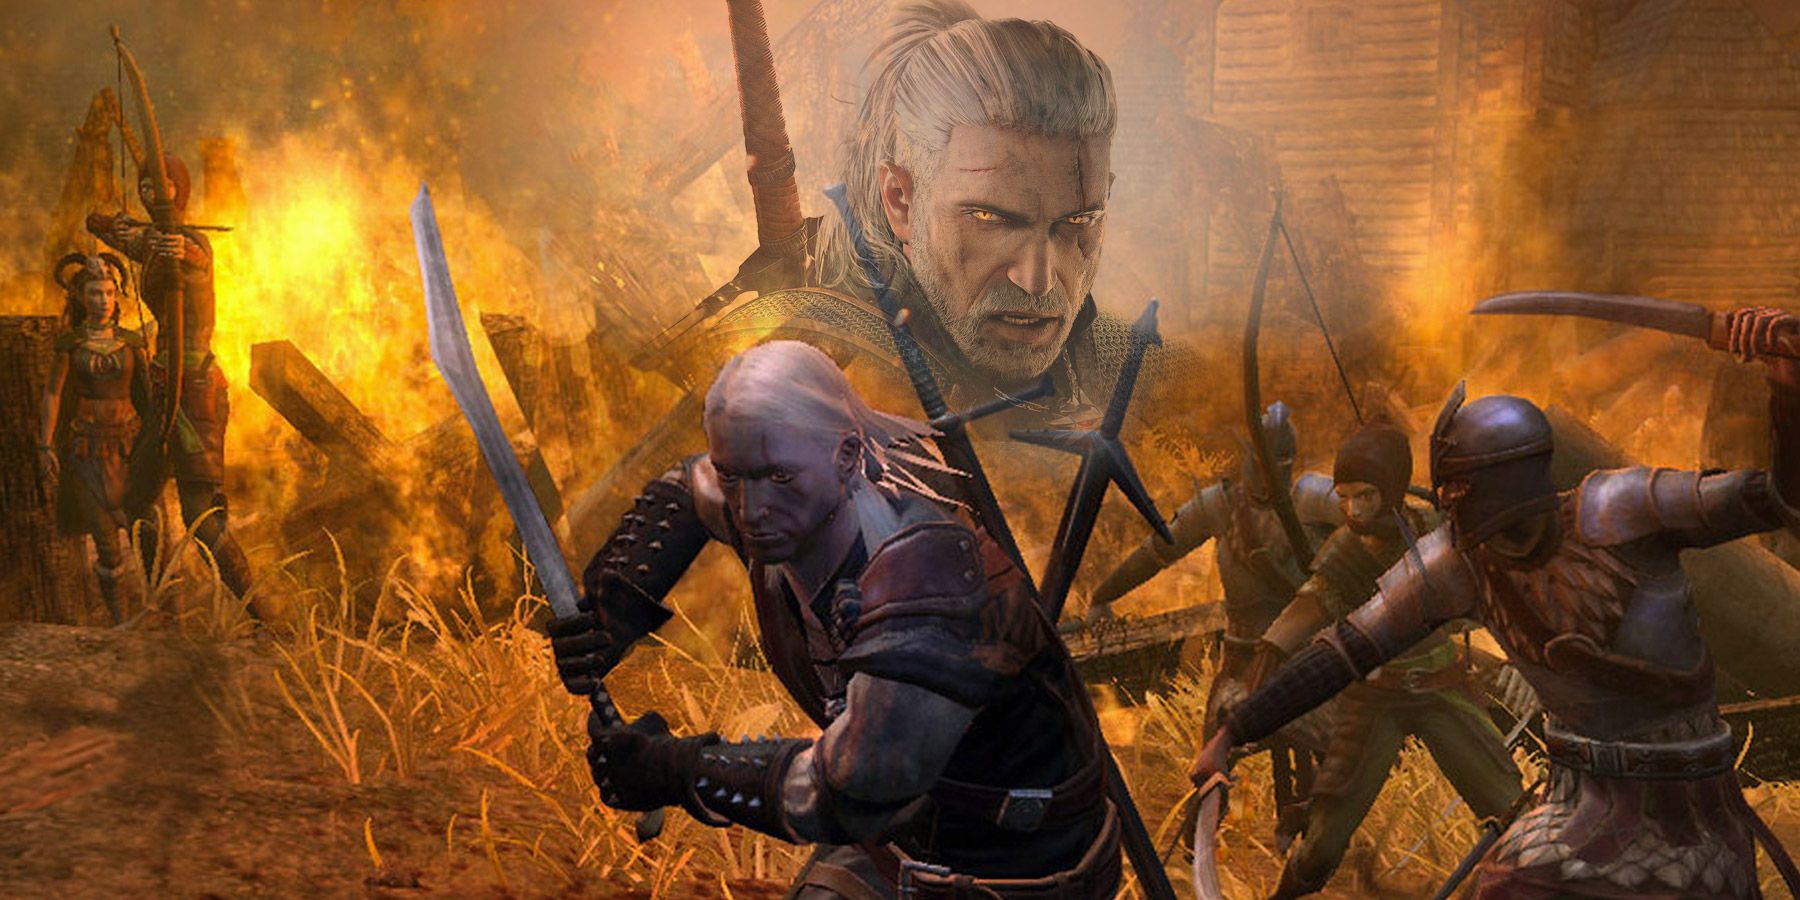 Witcher 1 Remake as a quick way for CDPR to bounce back?